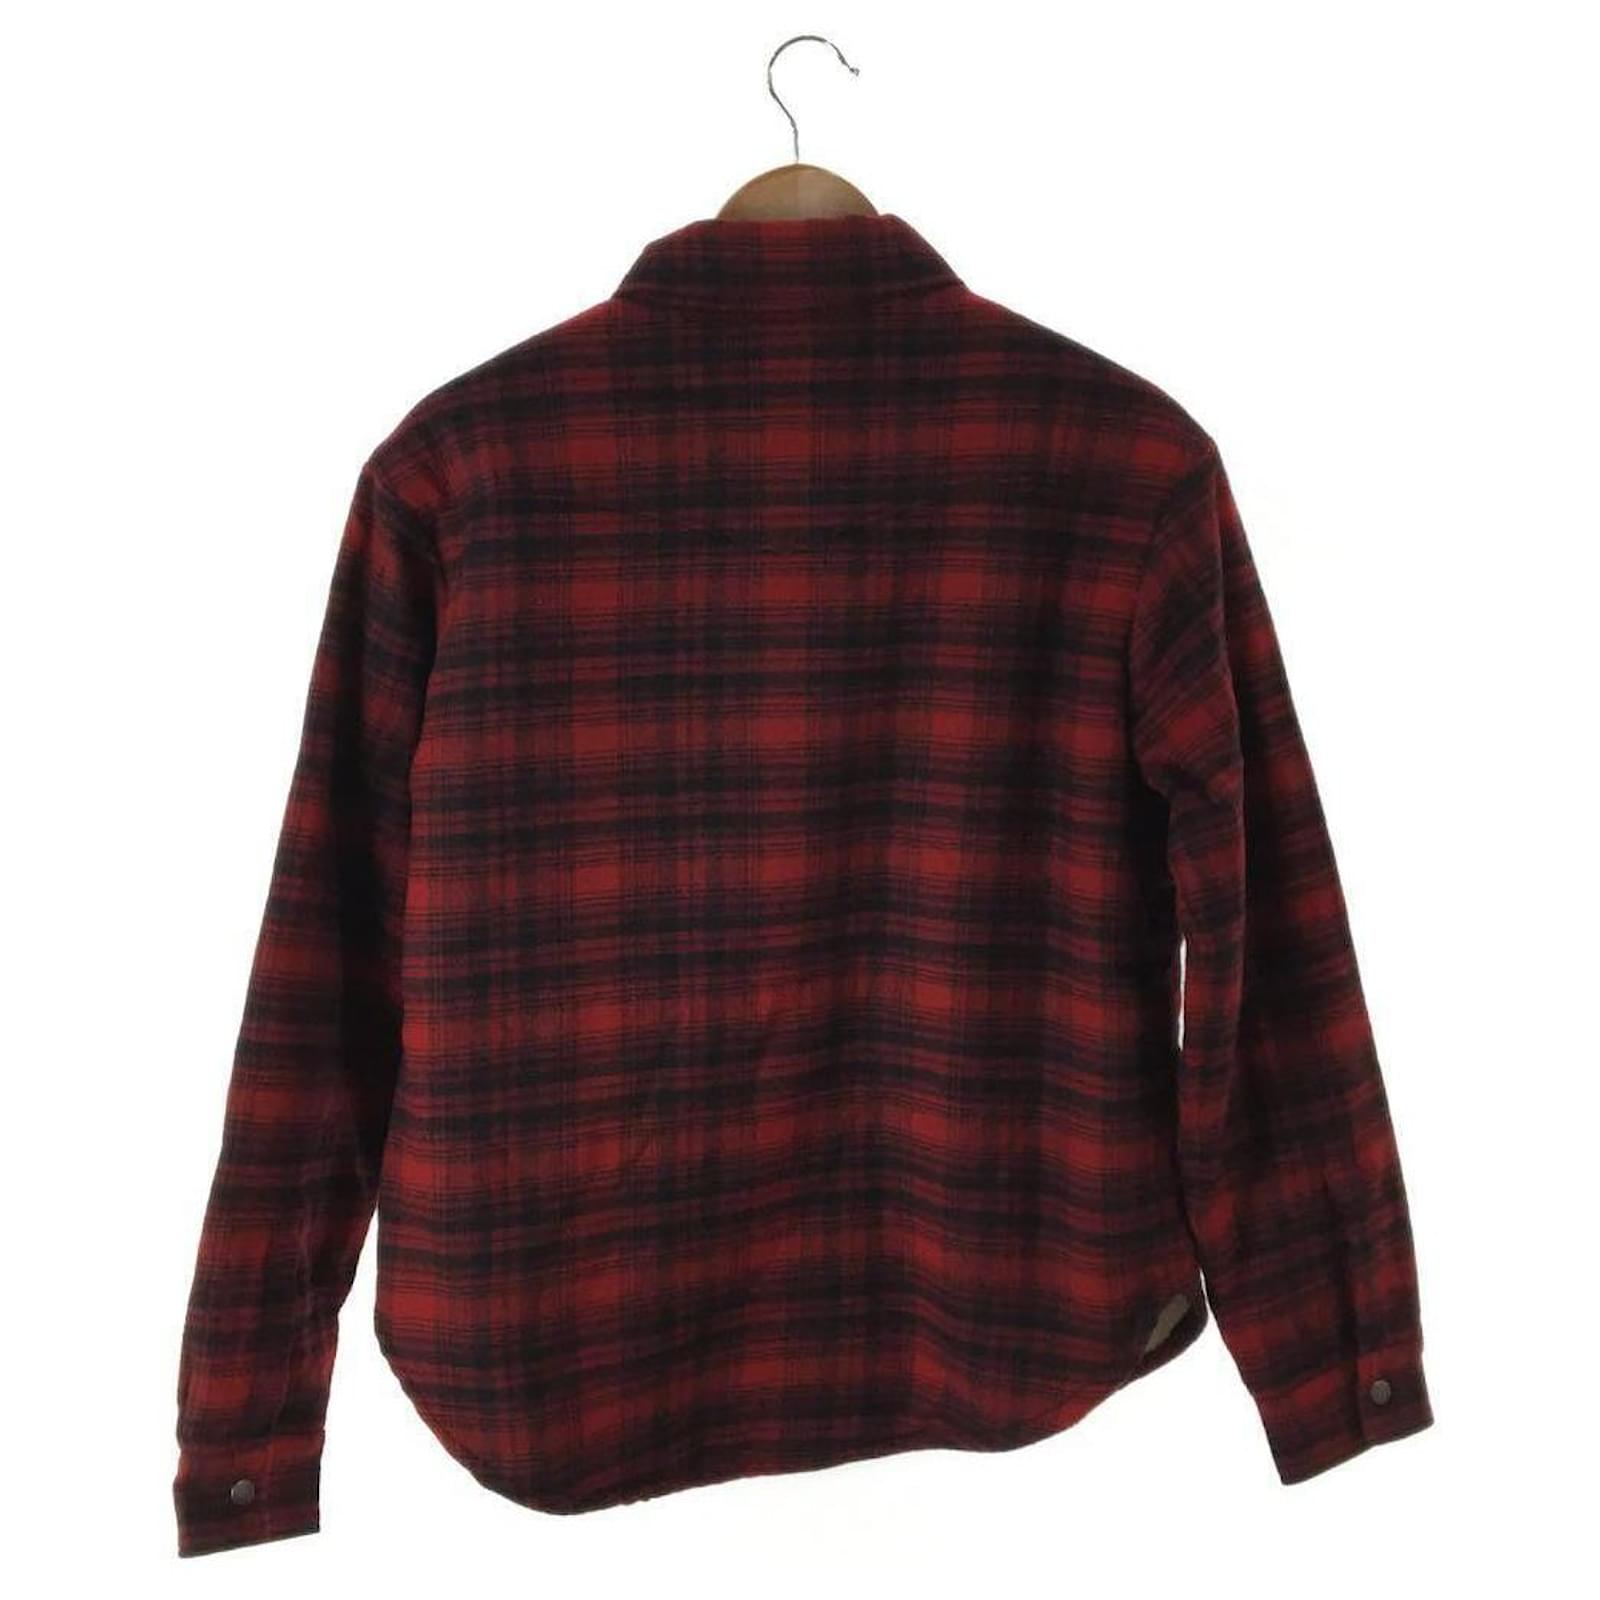 SAINT LAURENT 20AW / Ombray Check Boa Shirt Jacket / M / Wool / RED ...